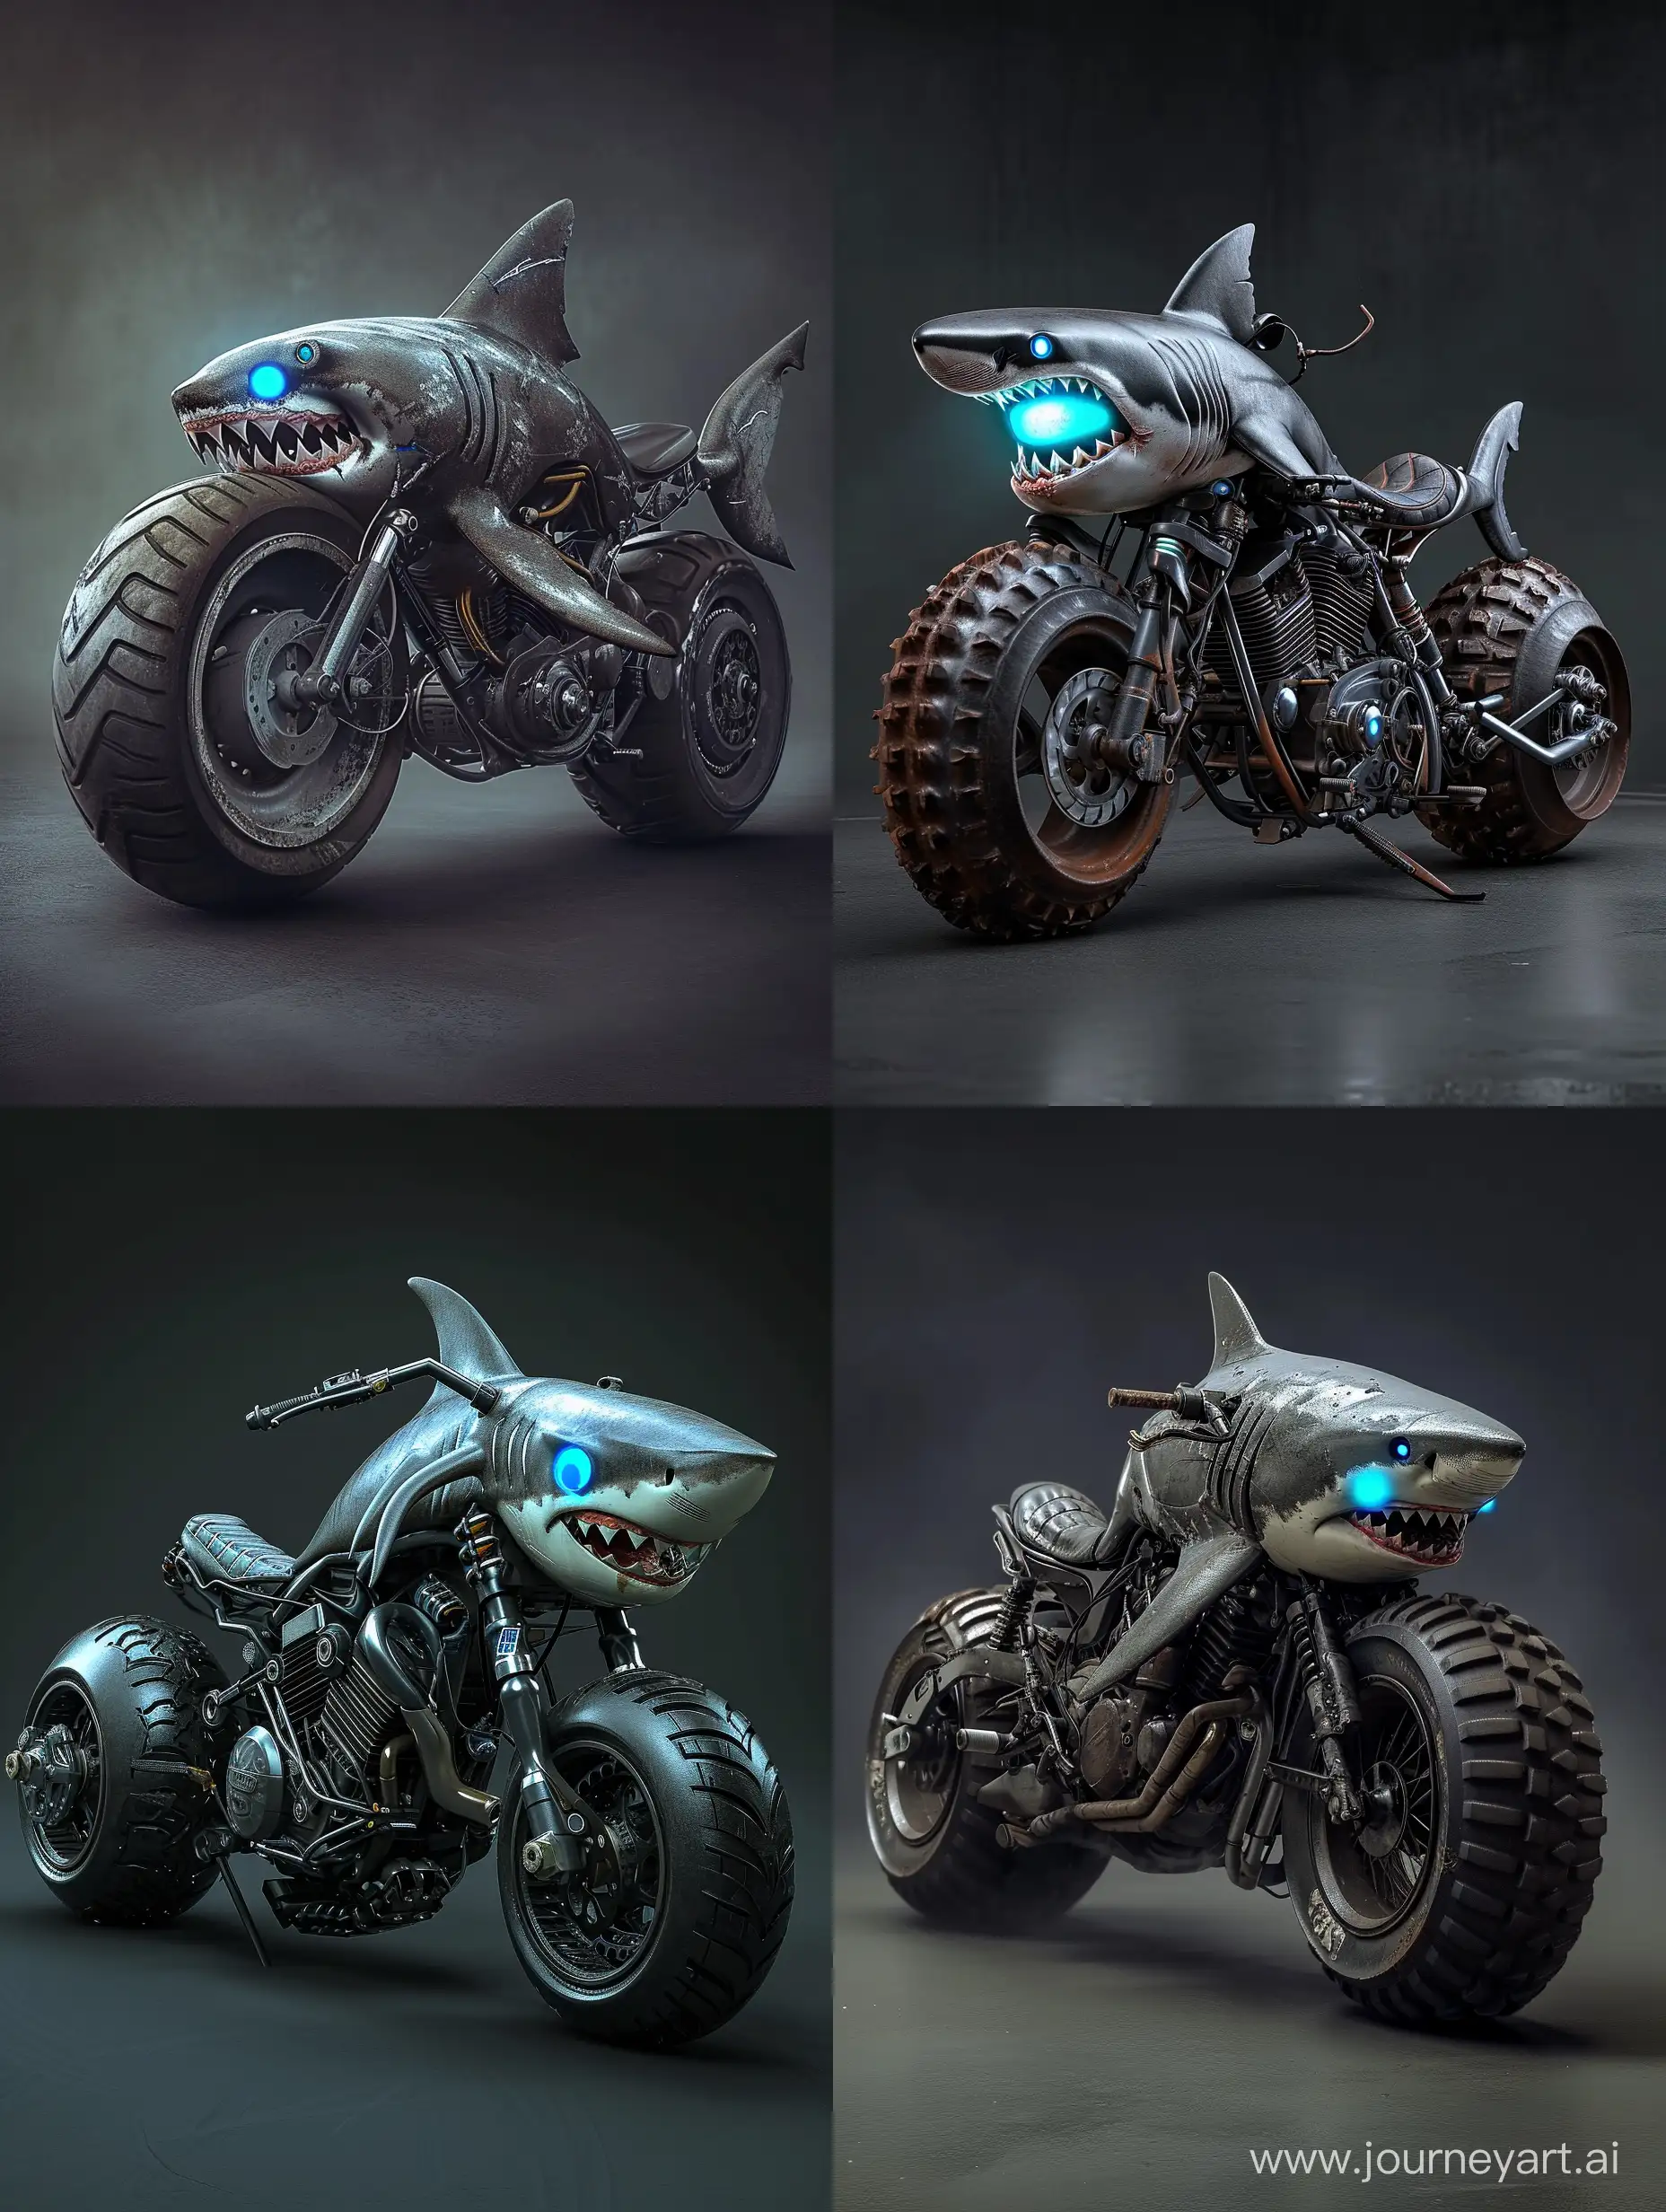 Glowing-BlueEyed-Shark-Motorcycle-with-Sharp-Teeth-and-Large-Wheels-on-Dark-Grey-Background